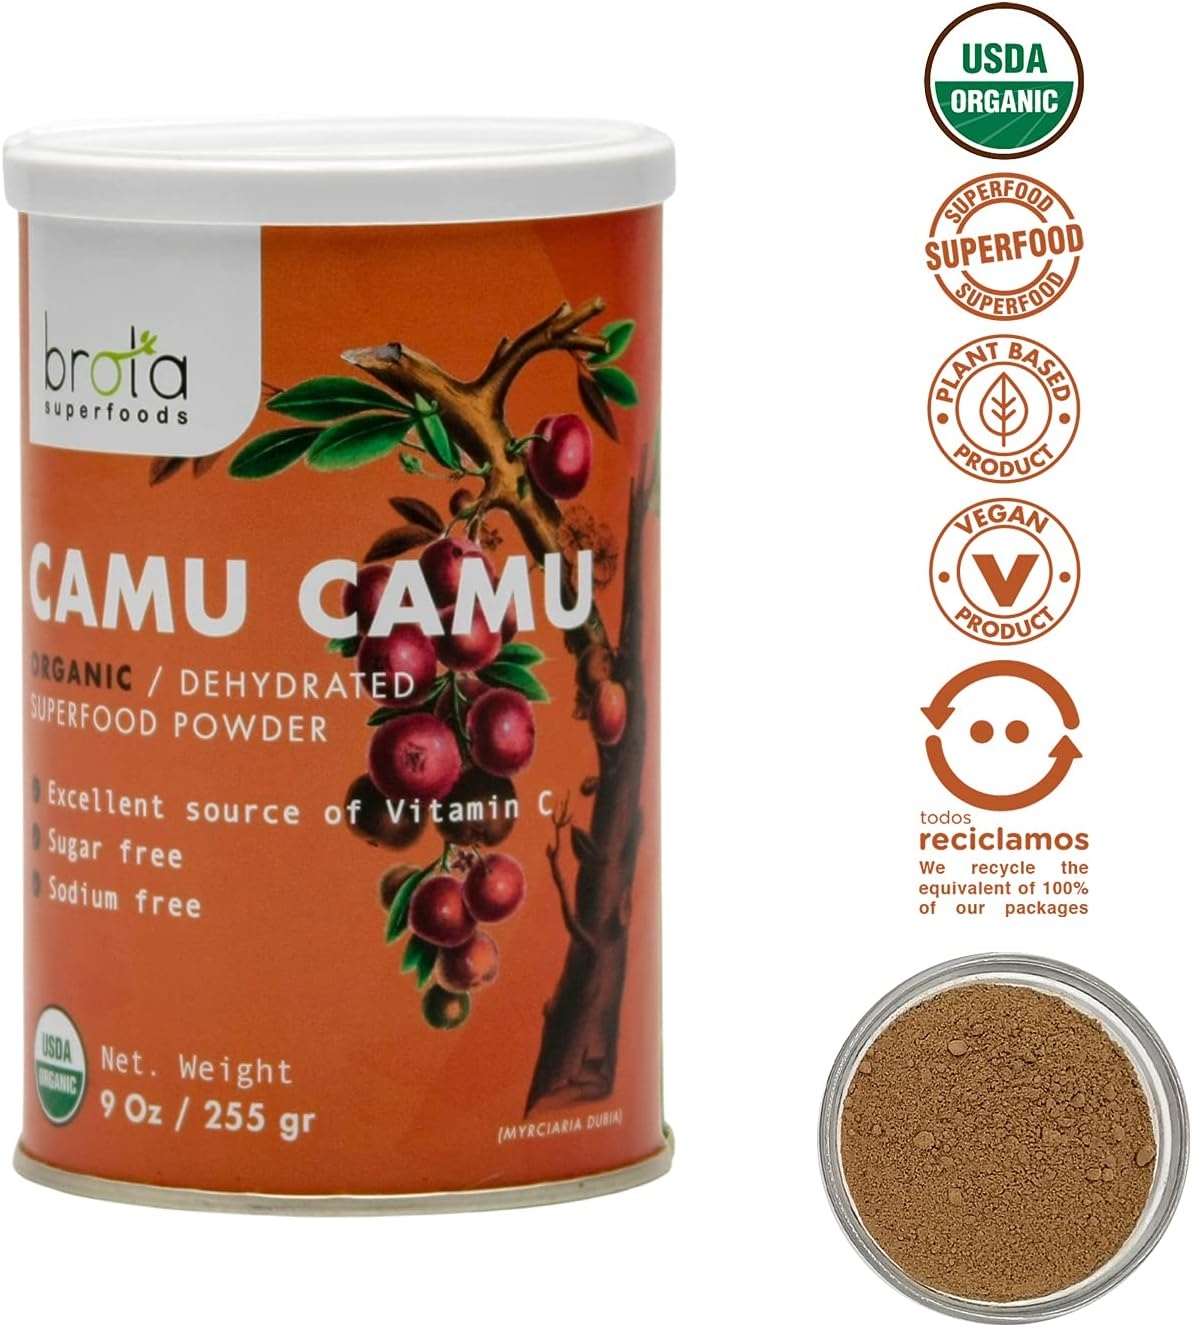 BROTA SUPERFOODS Camu Camu Powder – 9 Oz of Immune Booster – The Perfect Vitamin C Immune Support – Premium Organic Superfoods Powder – 100% Natural Foods with No Sweeteners, Additives, or Fillers